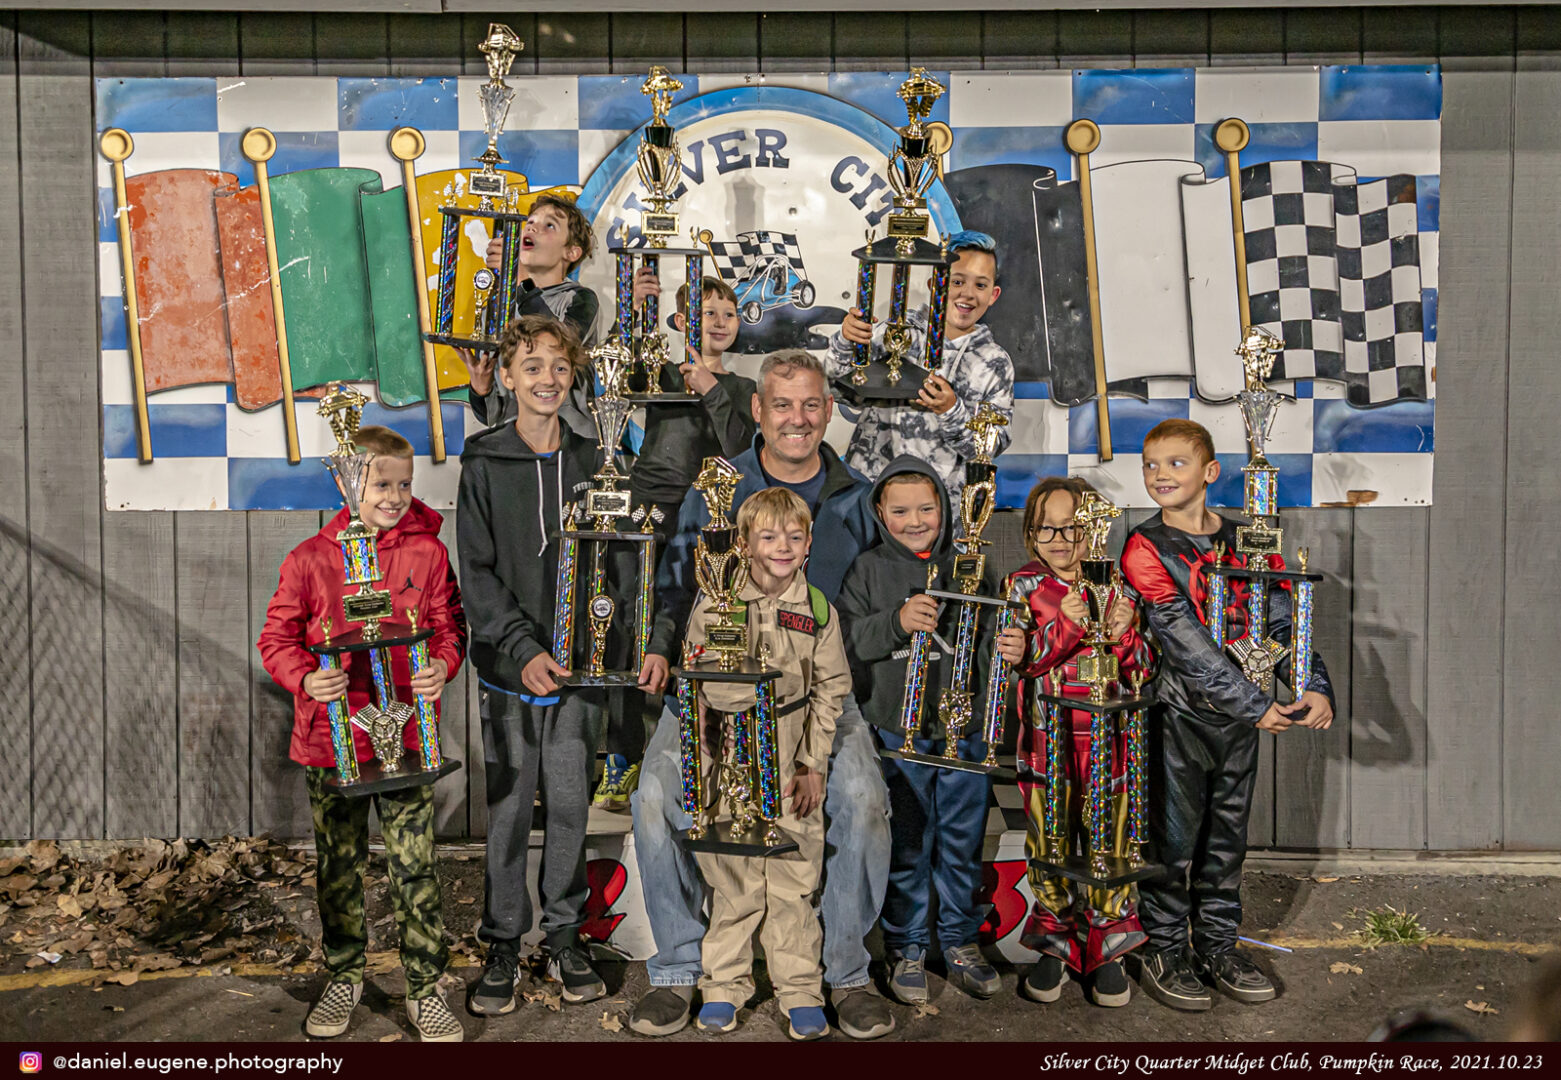 A Group of Kids Standing With a Trophy Along With a Man